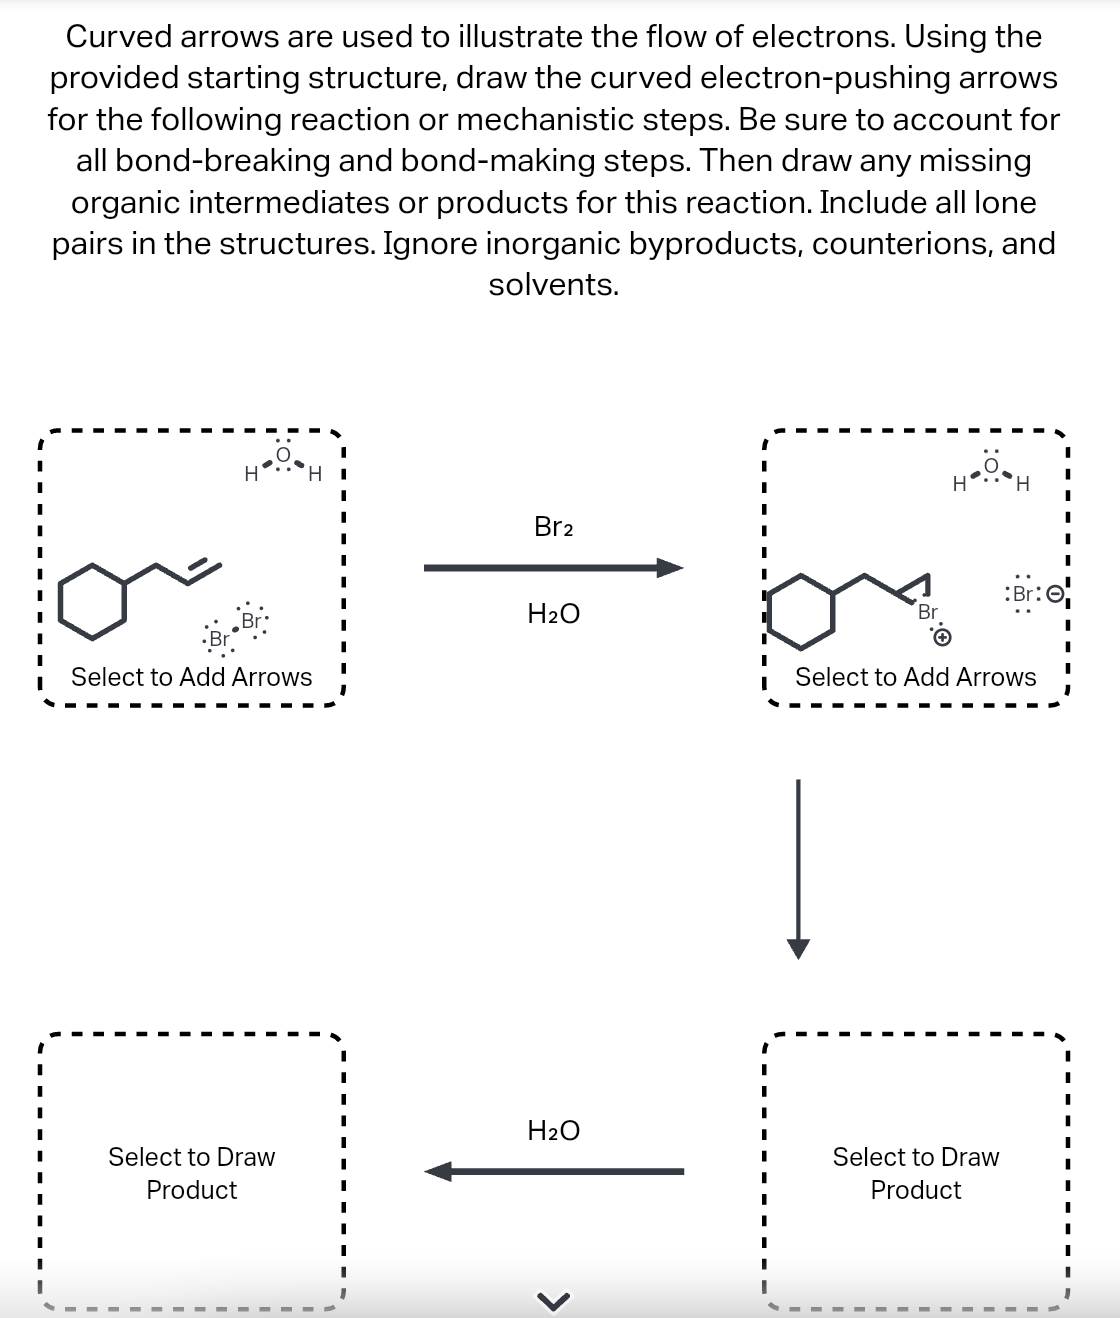 Curved arrows are used to illustrate the flow of electrons. Using the
provided starting structure, draw the curved electron-pushing arrows
for the following reaction or mechanistic steps. Be sure to account for
all bond-breaking and bond-making steps. Then draw any missing
organic intermediates or products for this reaction. Include all lone
pairs in the structures. Ignore inorganic byproducts, counterions, and
solvents.
H H
Select to Add Arrows
Select to Draw
Product
I
Br2
H₂O
H₂O
<
Br
.Ö.
H
'Н
:Br:
Select to Add Arrows
Select to Draw
Product
I
I
I
I
I
I
I
I
I
I
I
I